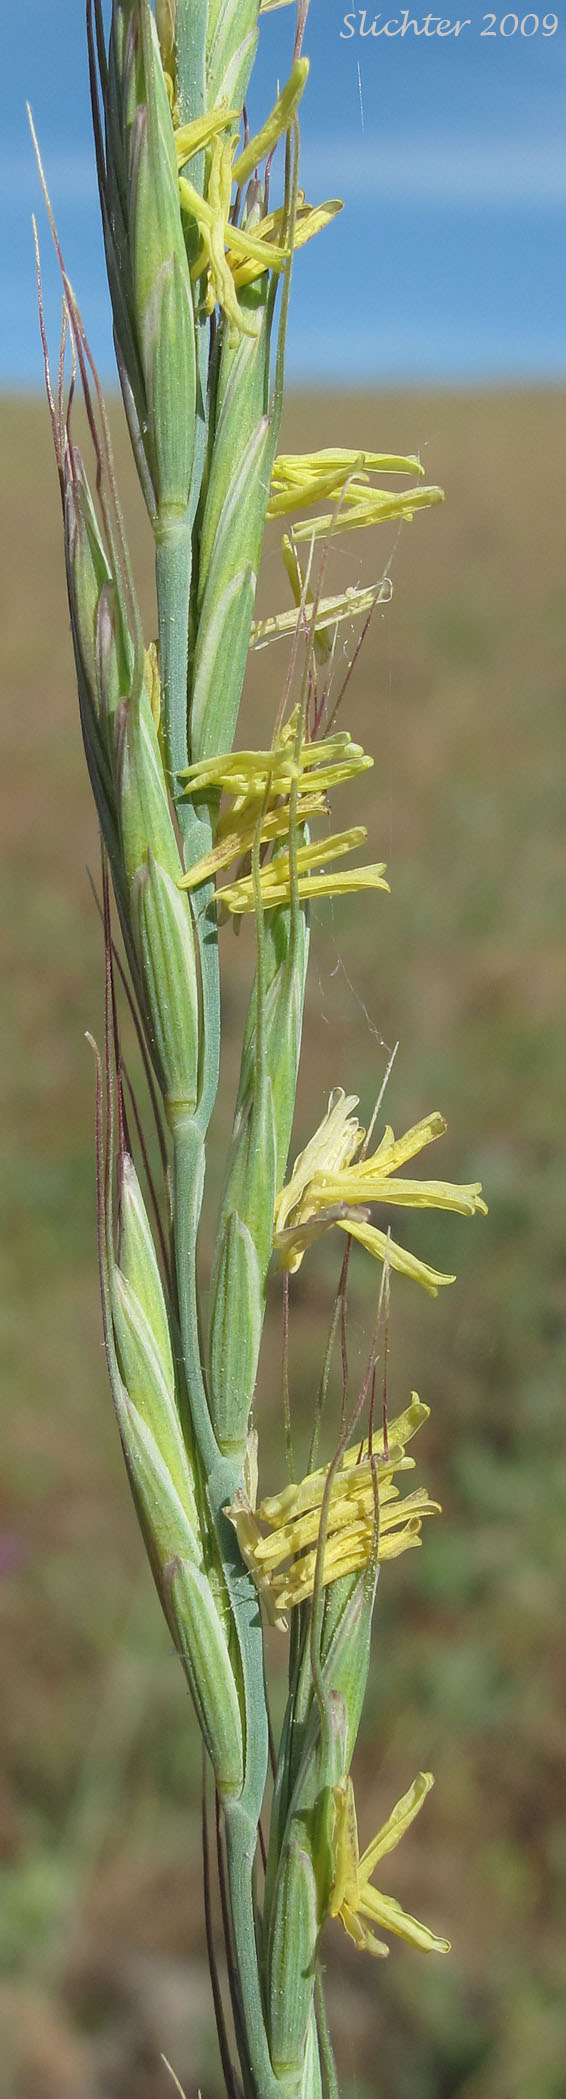 Inflorescence of Bluebunch Wheatgrass, Beardless Bluebunch Wheatgrass, Beardless Wheatgrass: Pseudoroegneria spicata (Synonyms: Agropyron inerme, Agropyron spicatum , Agropyron spicatum var. inerme, Agropyron spicatum var. pubescens, Agropyron vaseyi, Elymus spicatus, Elytrigia spicata, Pseudoroegneria spicata ssp. inermis, Pseudoroegneria spicata ssp. spicata, Roegneria spicata)